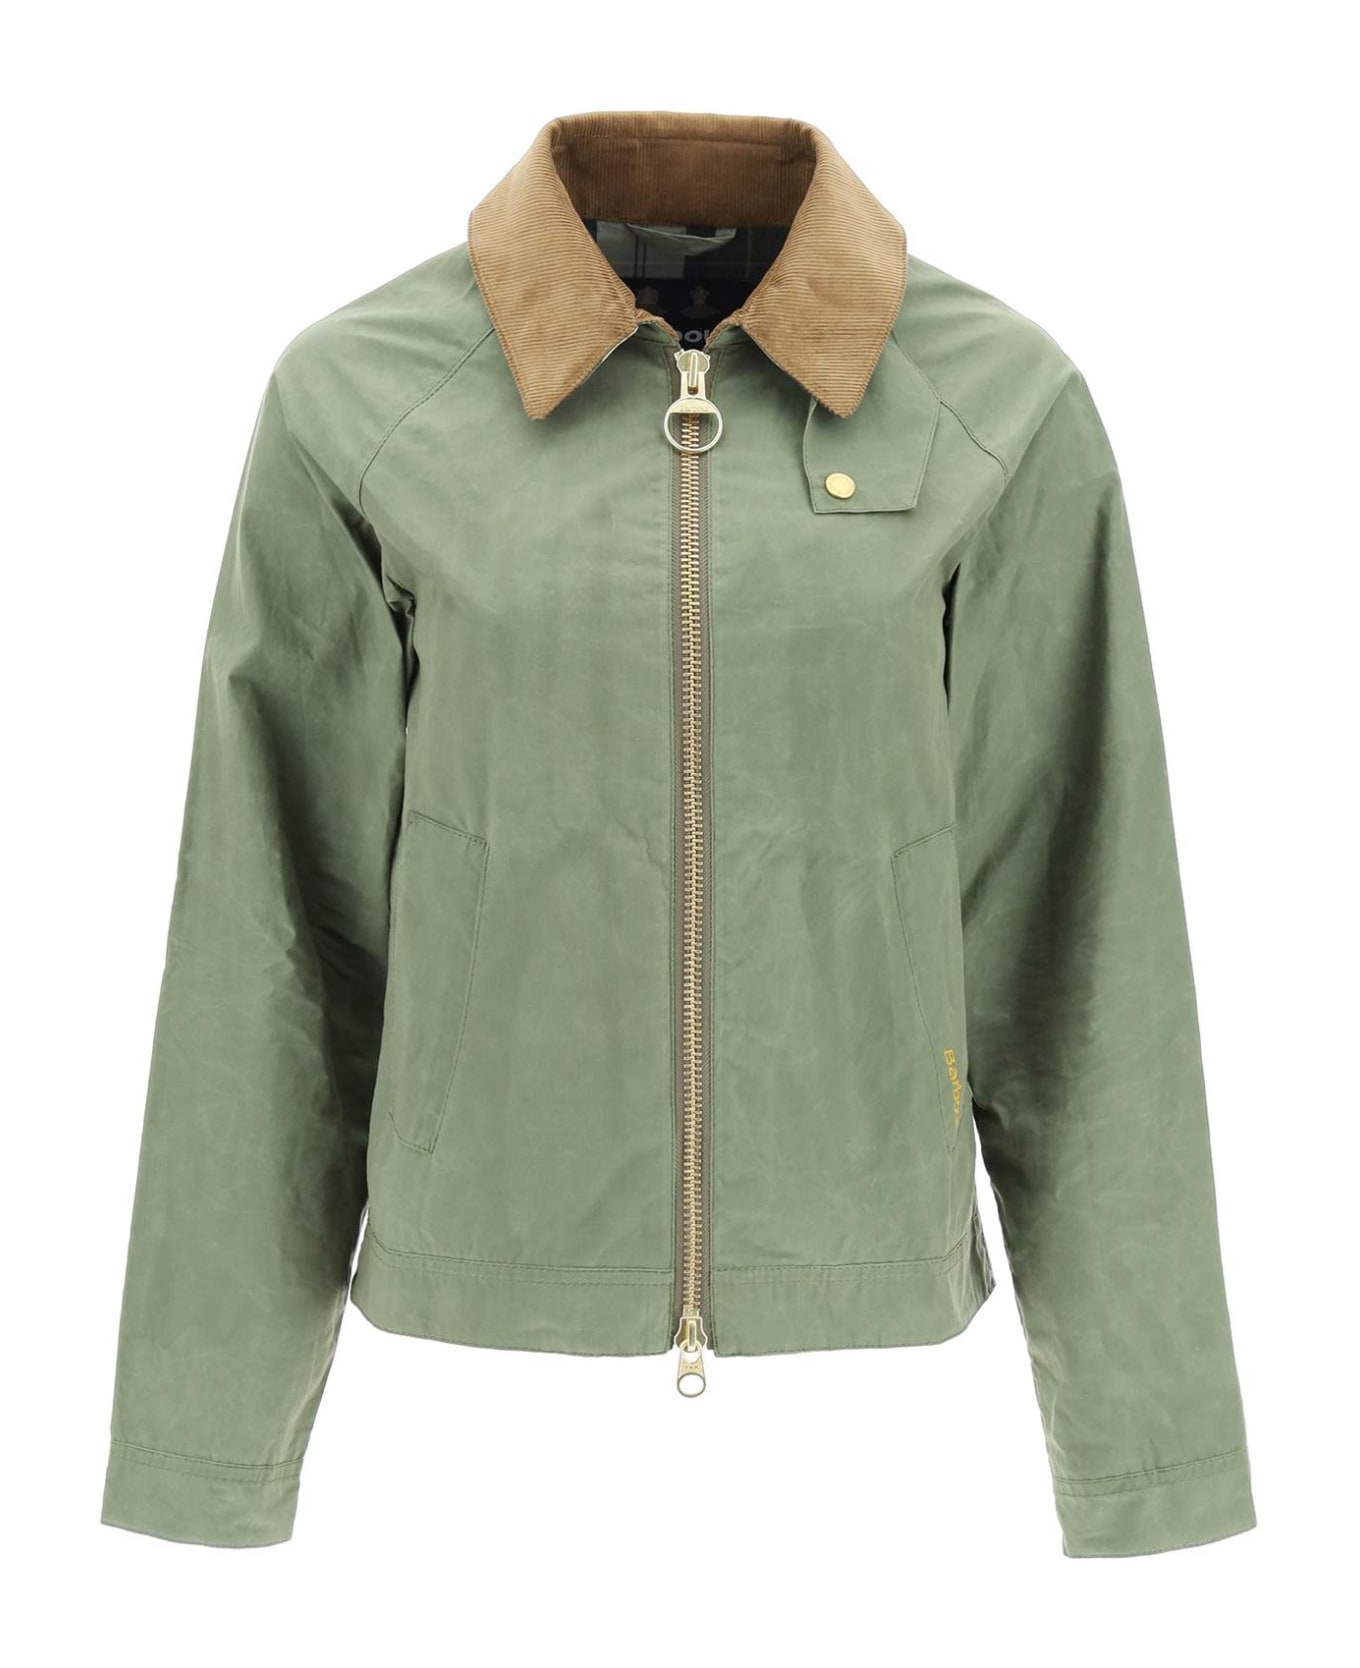 Barbour Campbell Vintage Overshirt Jacket - ARMY GREEN ANCIENT (Green) ジャケット